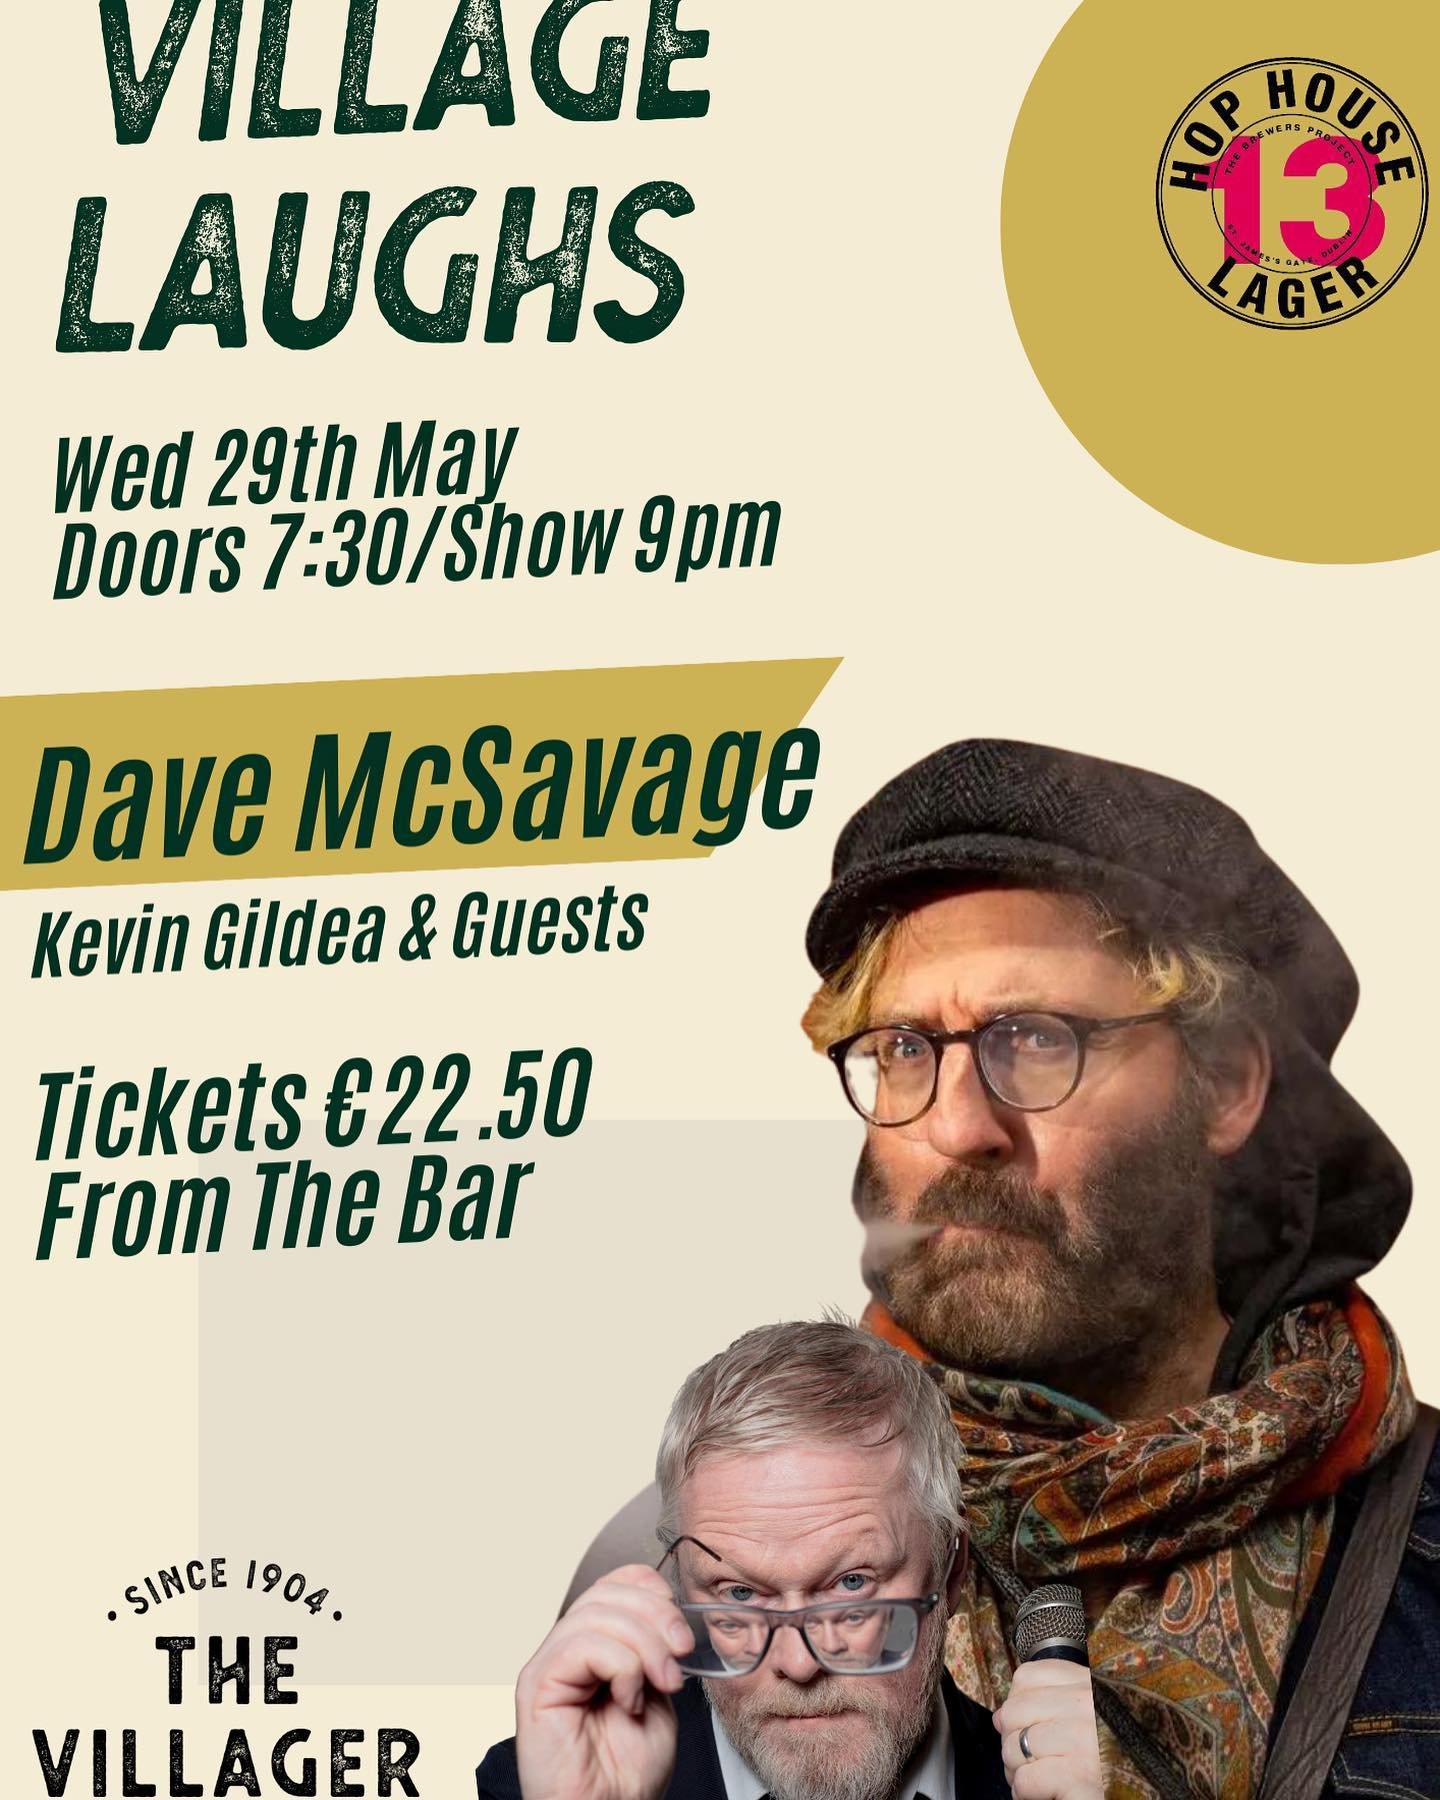 The gig that didn&rsquo;t happen, is now happening!!!! This day 3 weeks @therealdavidmcsavage will make his way to the Villager stage! Tickets on sale from today. They sold out in 48 hours last time, so don&rsquo;t delay! Get down, get some tickets a